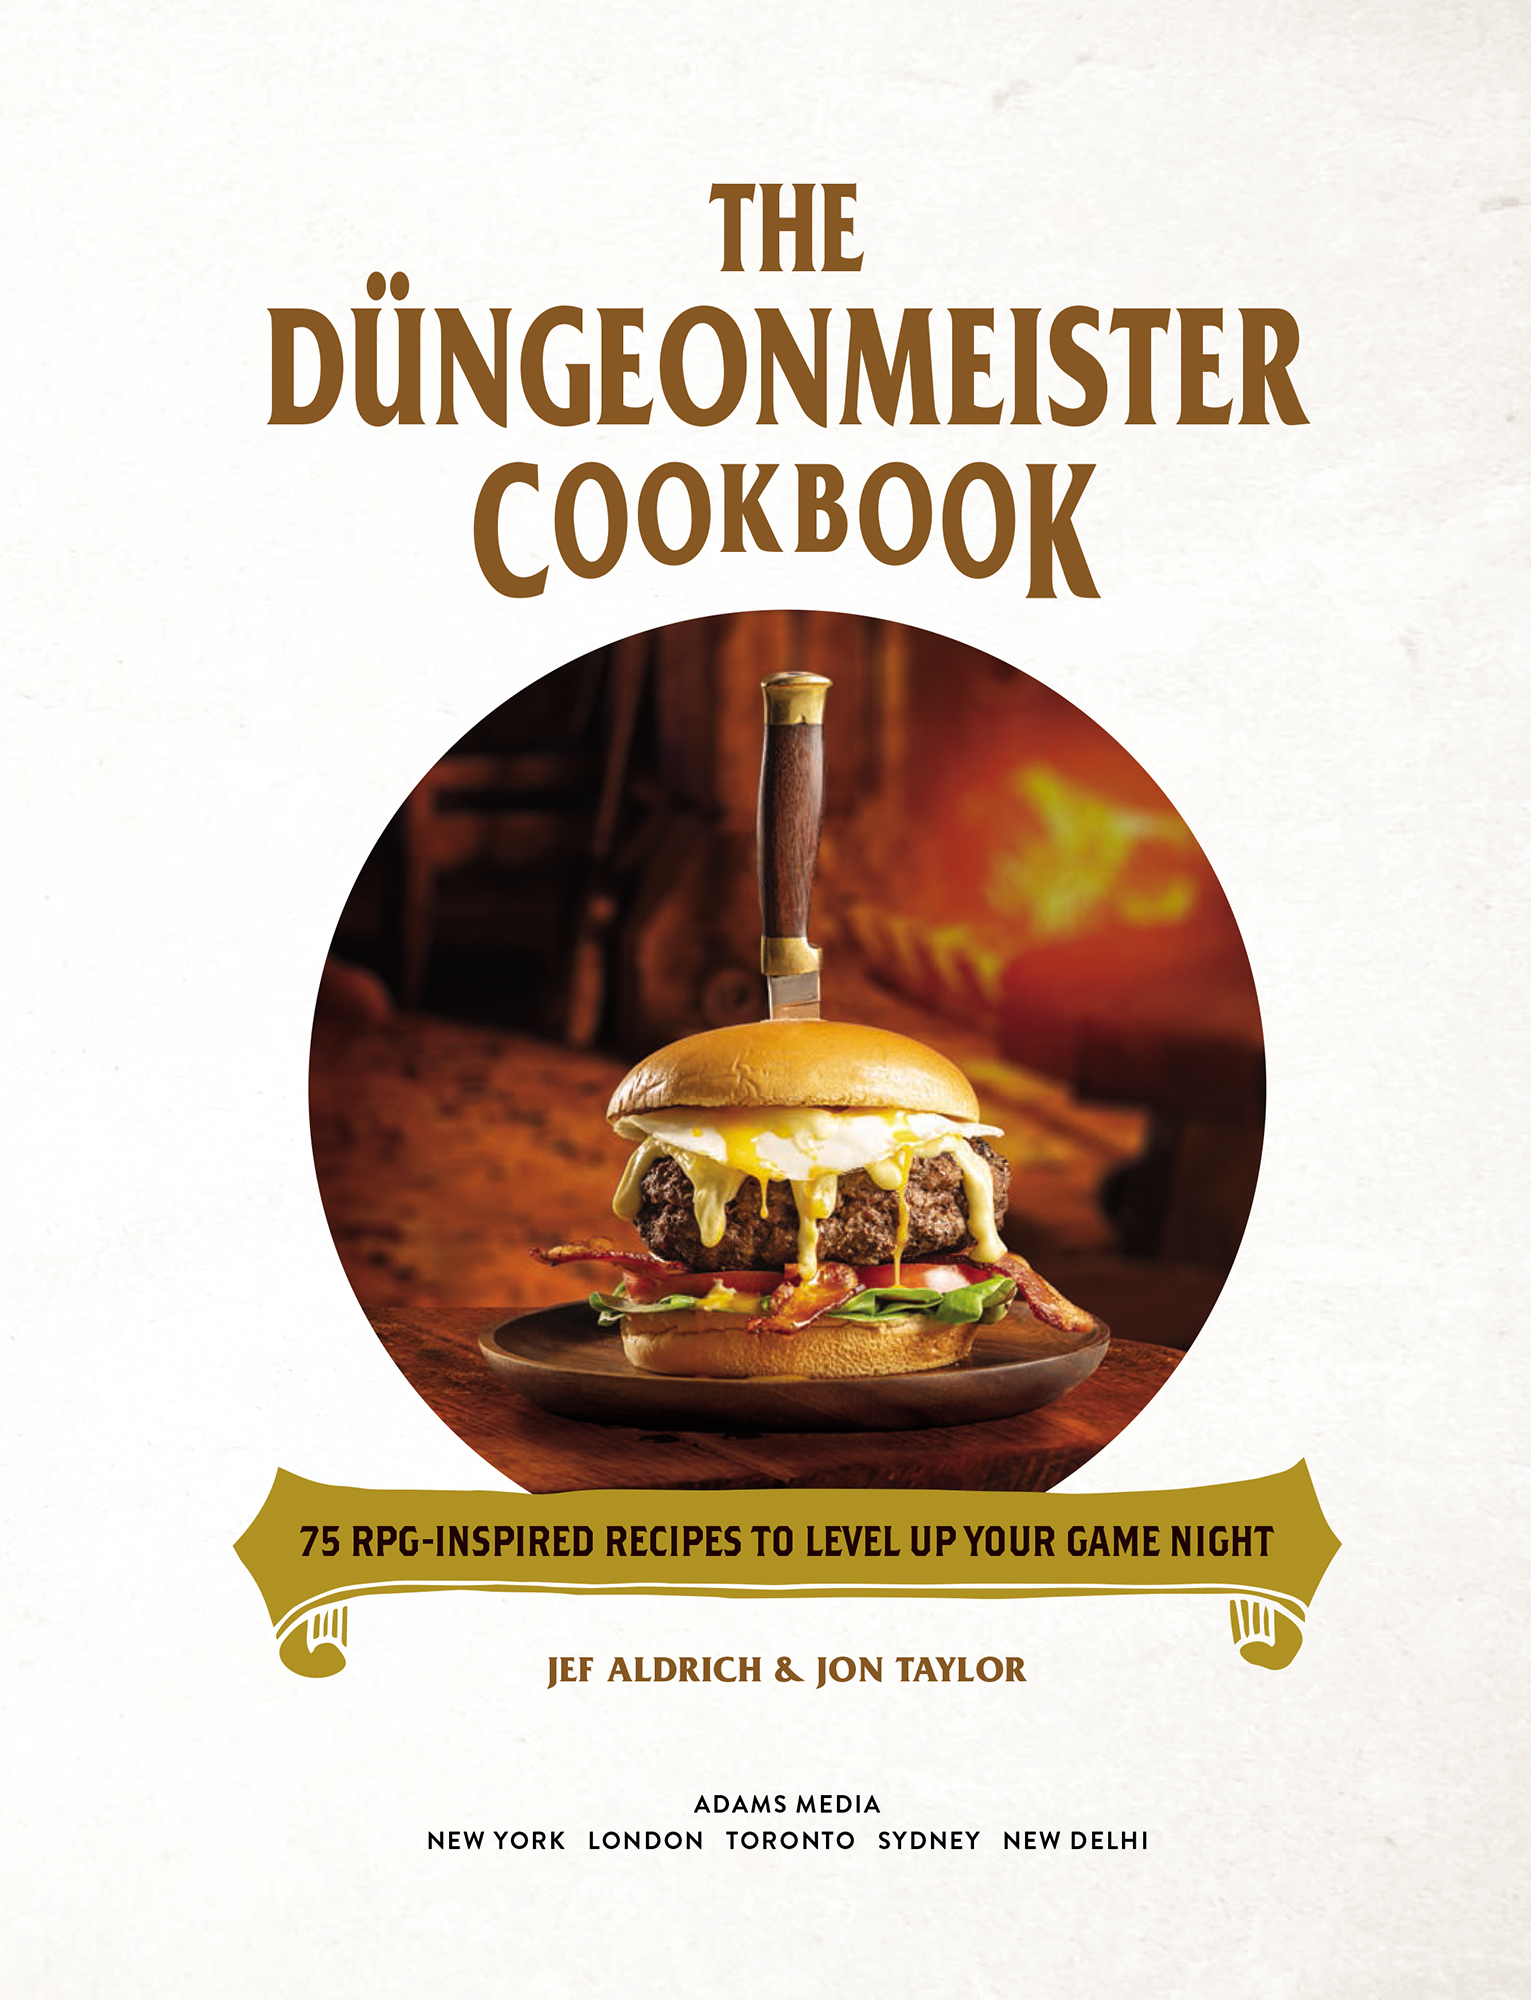 The Dngeonmeister Cookbook 75 RPG-Inspired Recipes to Level Up Your Game Night - image 2